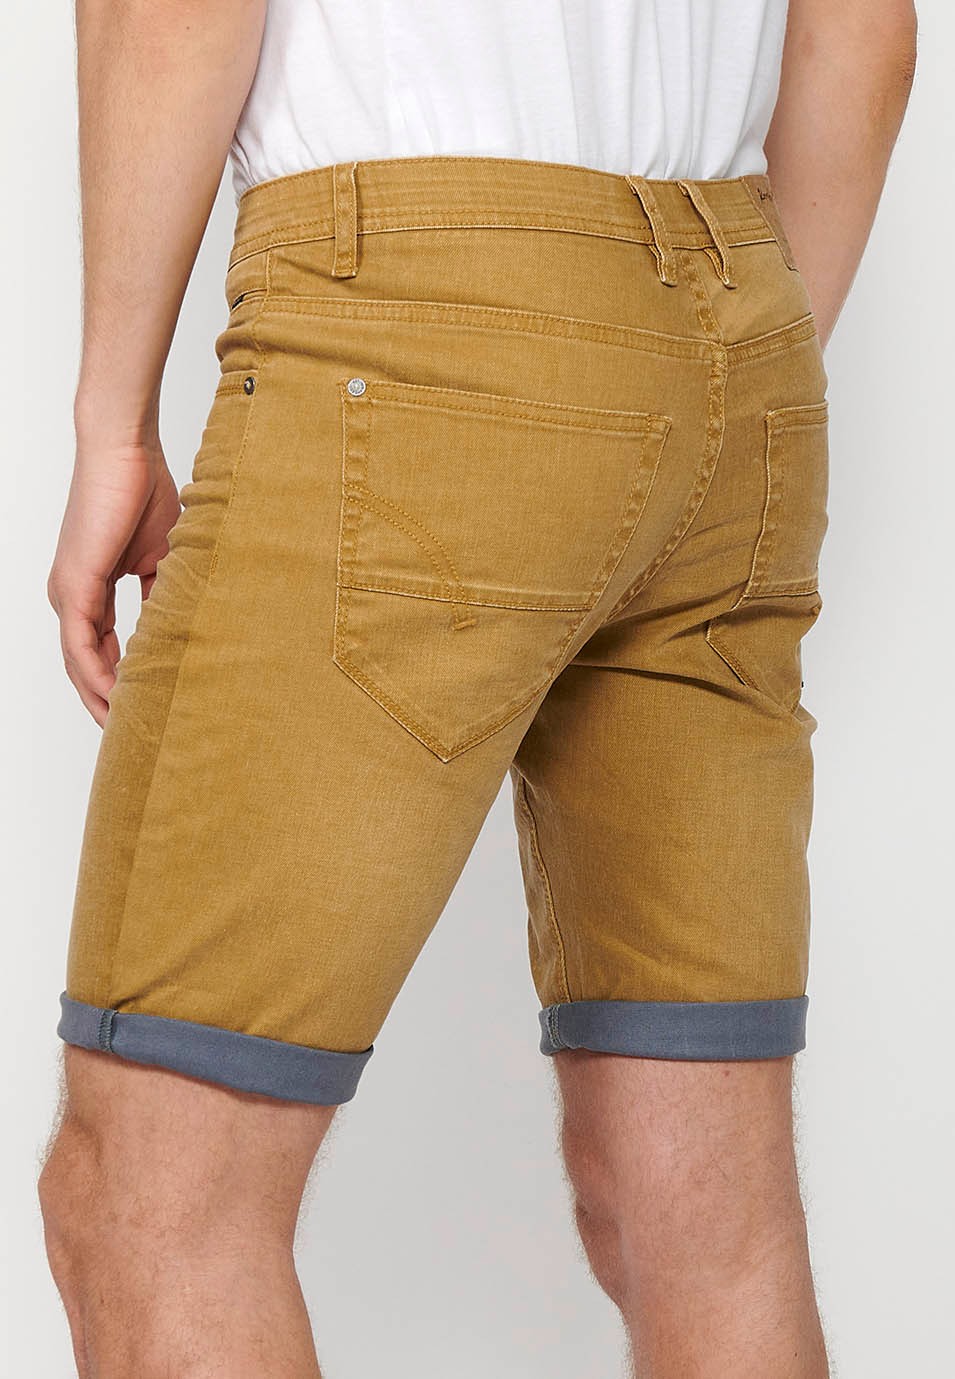 Denim Bermuda shorts with turn-up finish, front closure with zipper and button, with five pockets, one pocket pocket, Ocher Color for Men 4